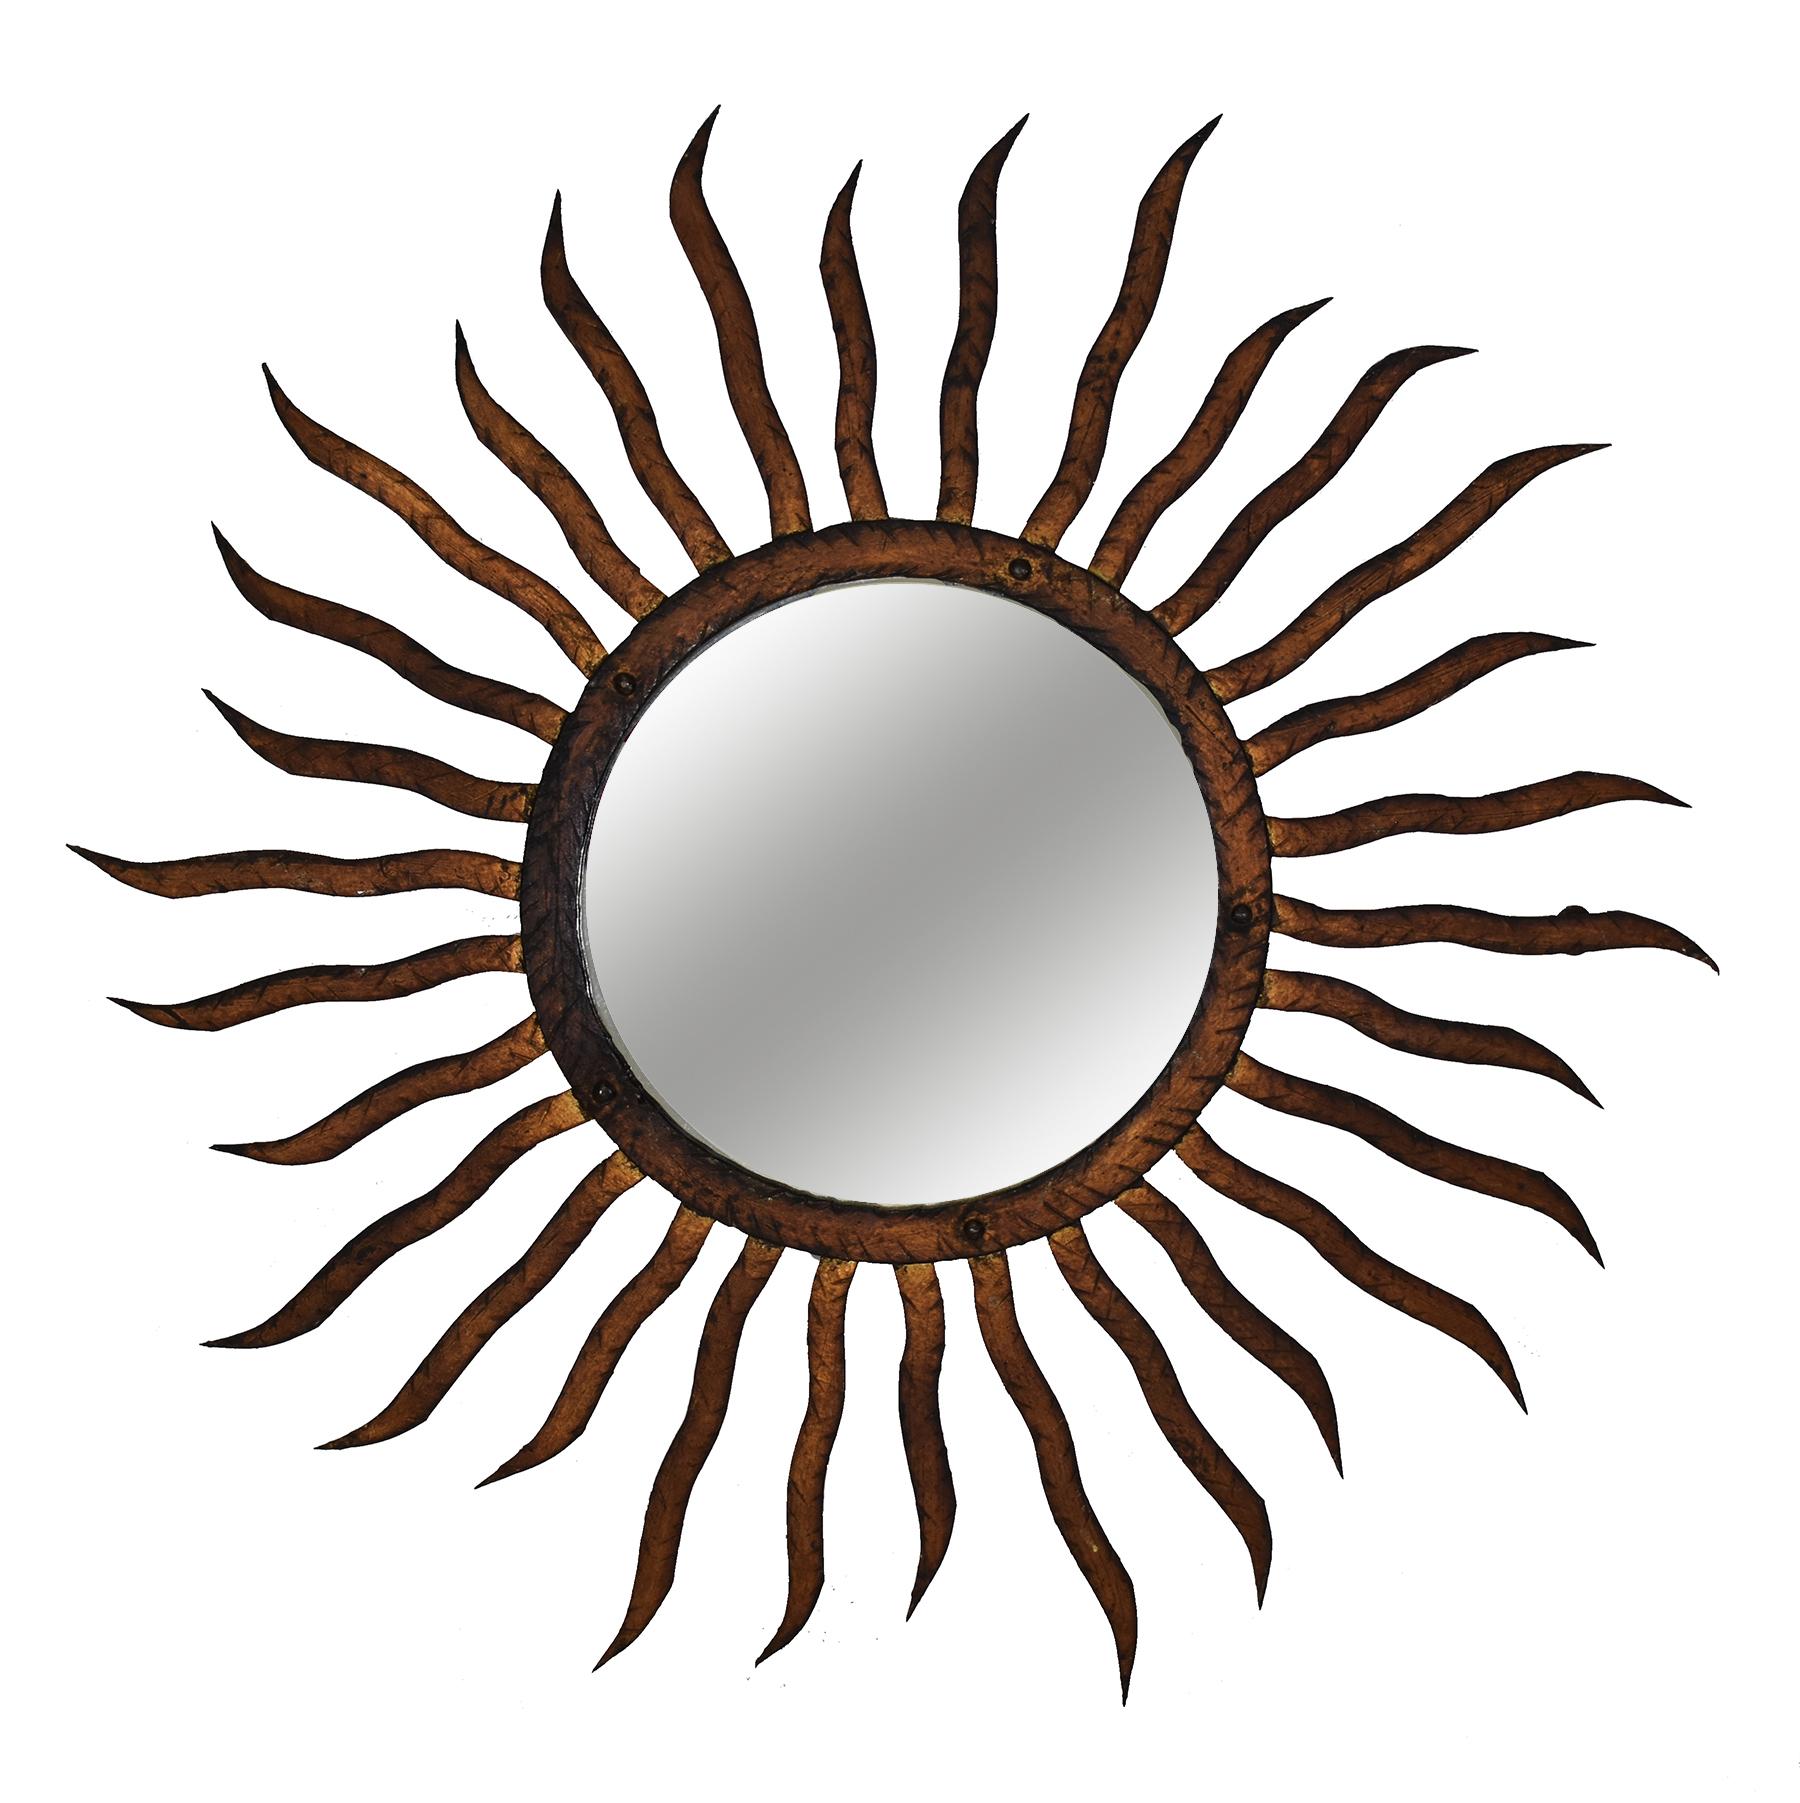 This medium-sized vintage gilded iron sun mirror is a dramatic accent piece in any room. Brings extra light to a space.
 